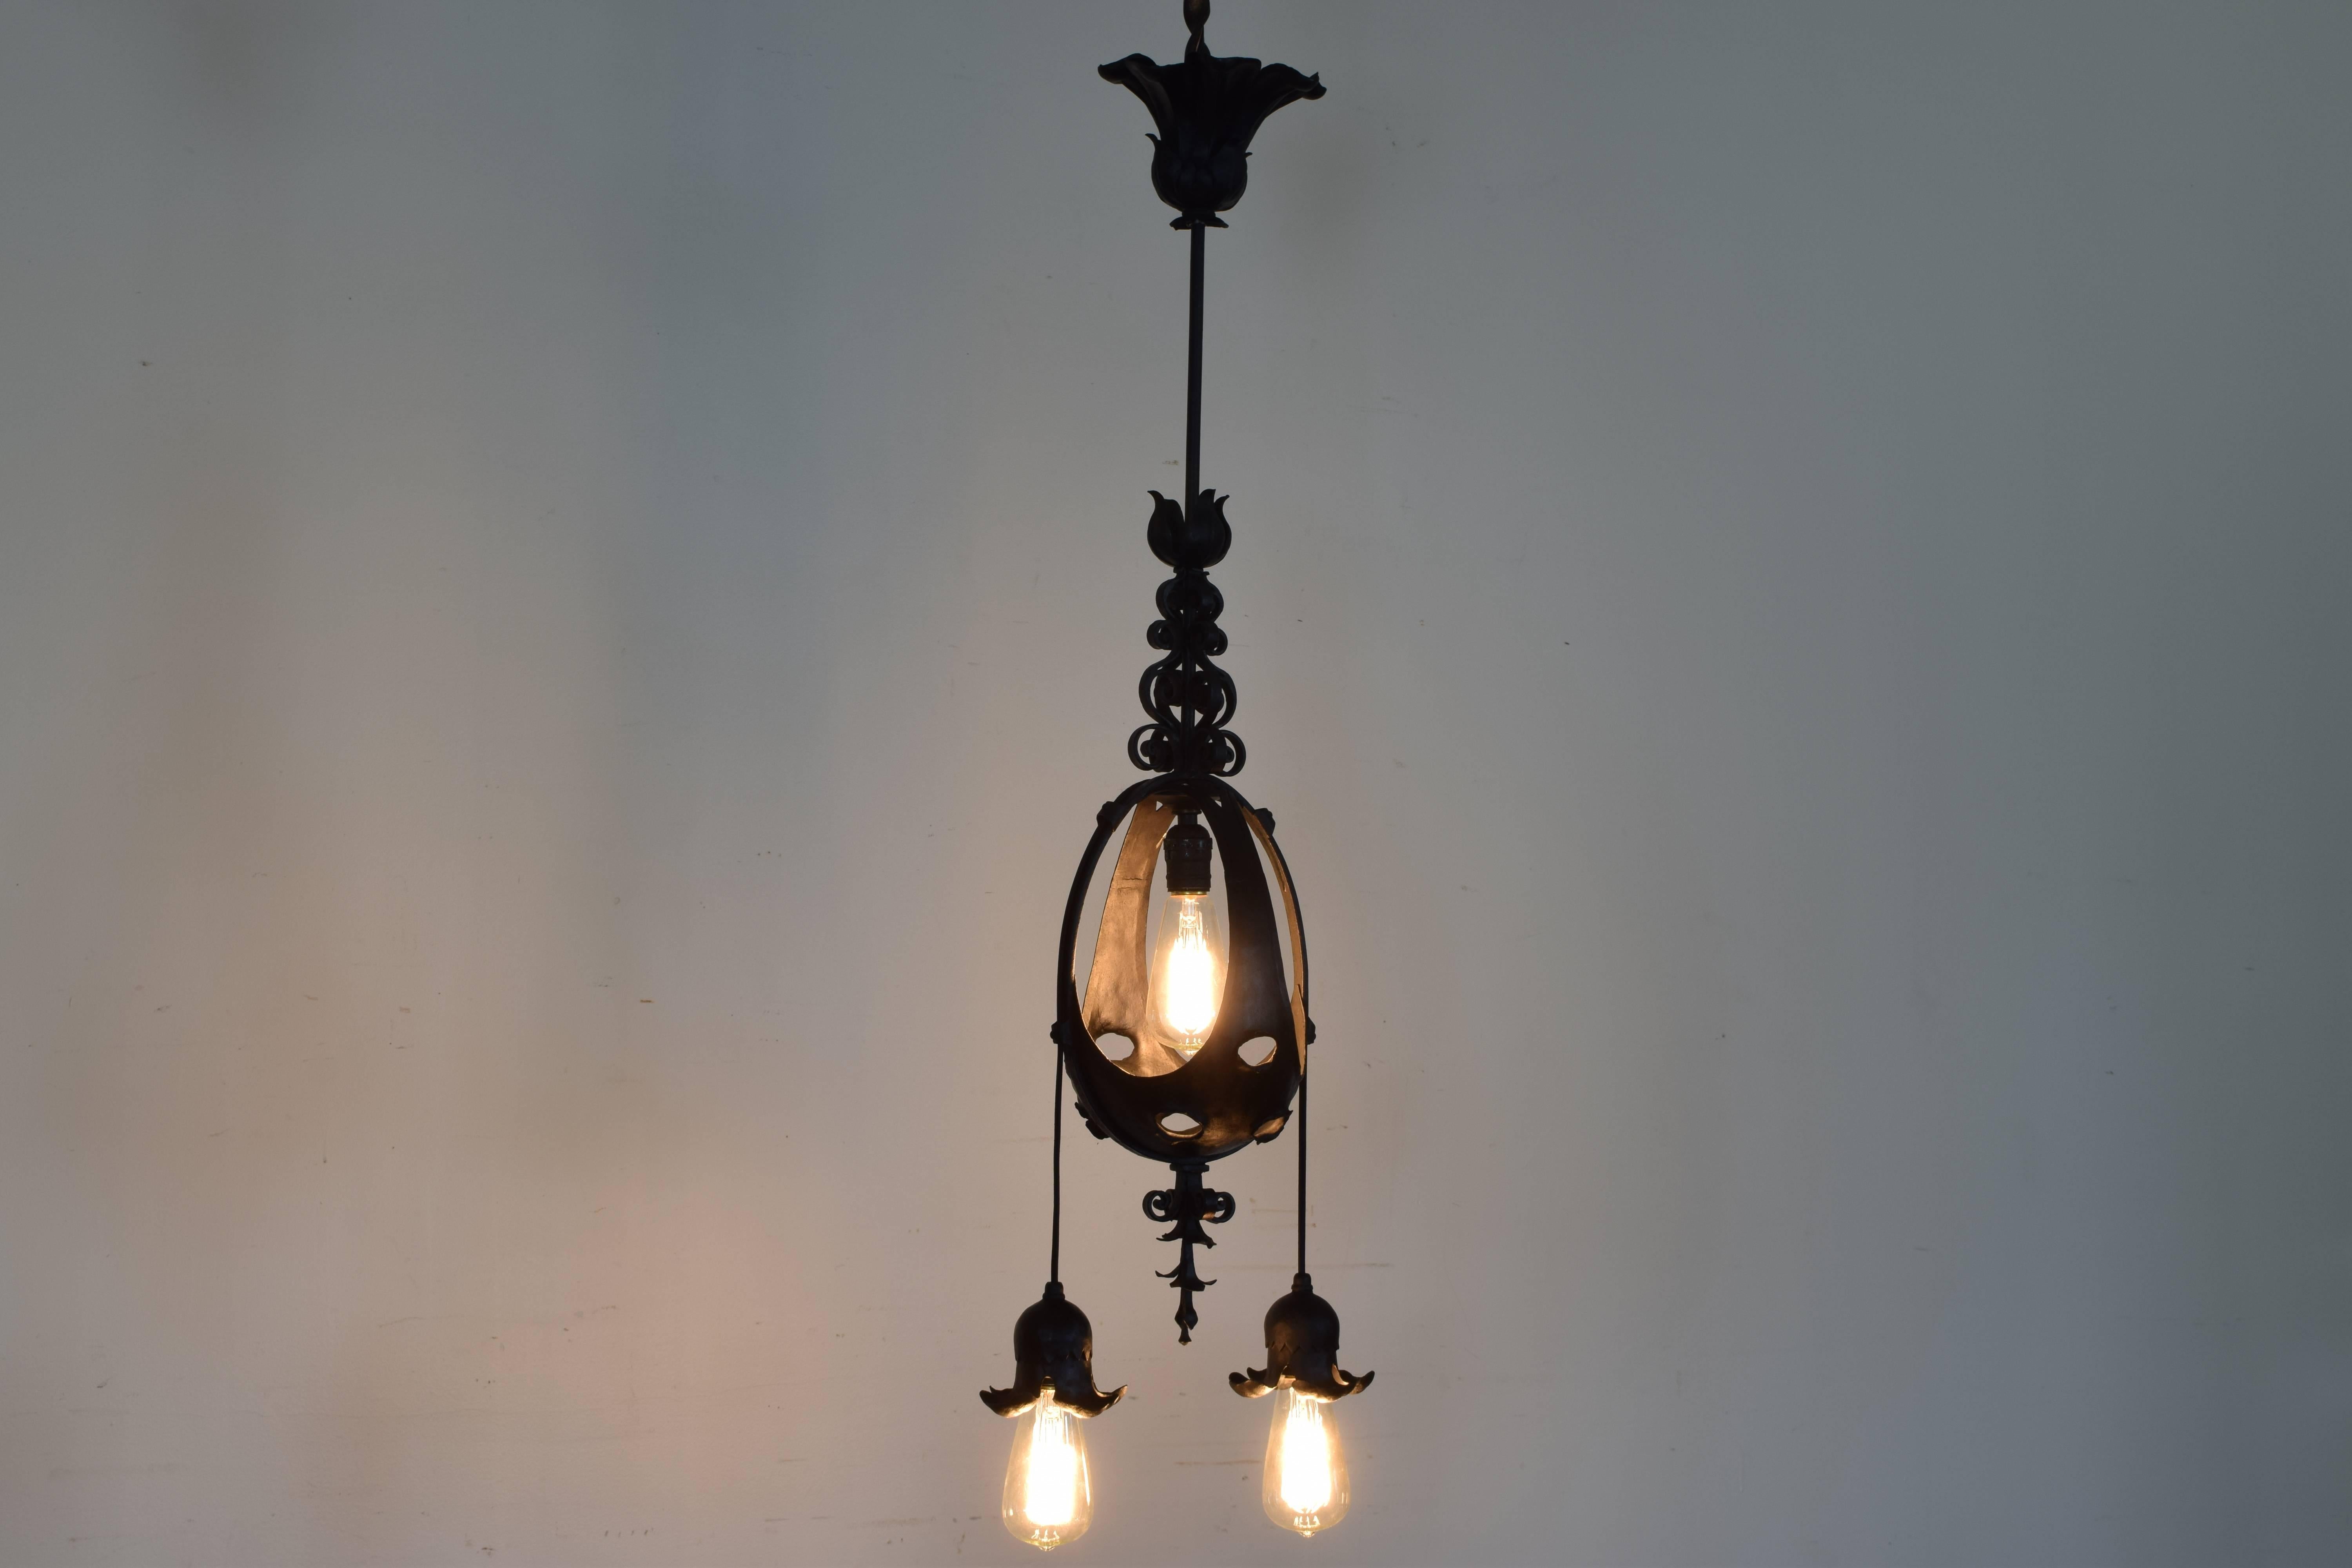 Italian, probably Milanese, wrought iron three-light orb chandelier, circa 1900. Of oval shape with pierced openings, with three down lights.